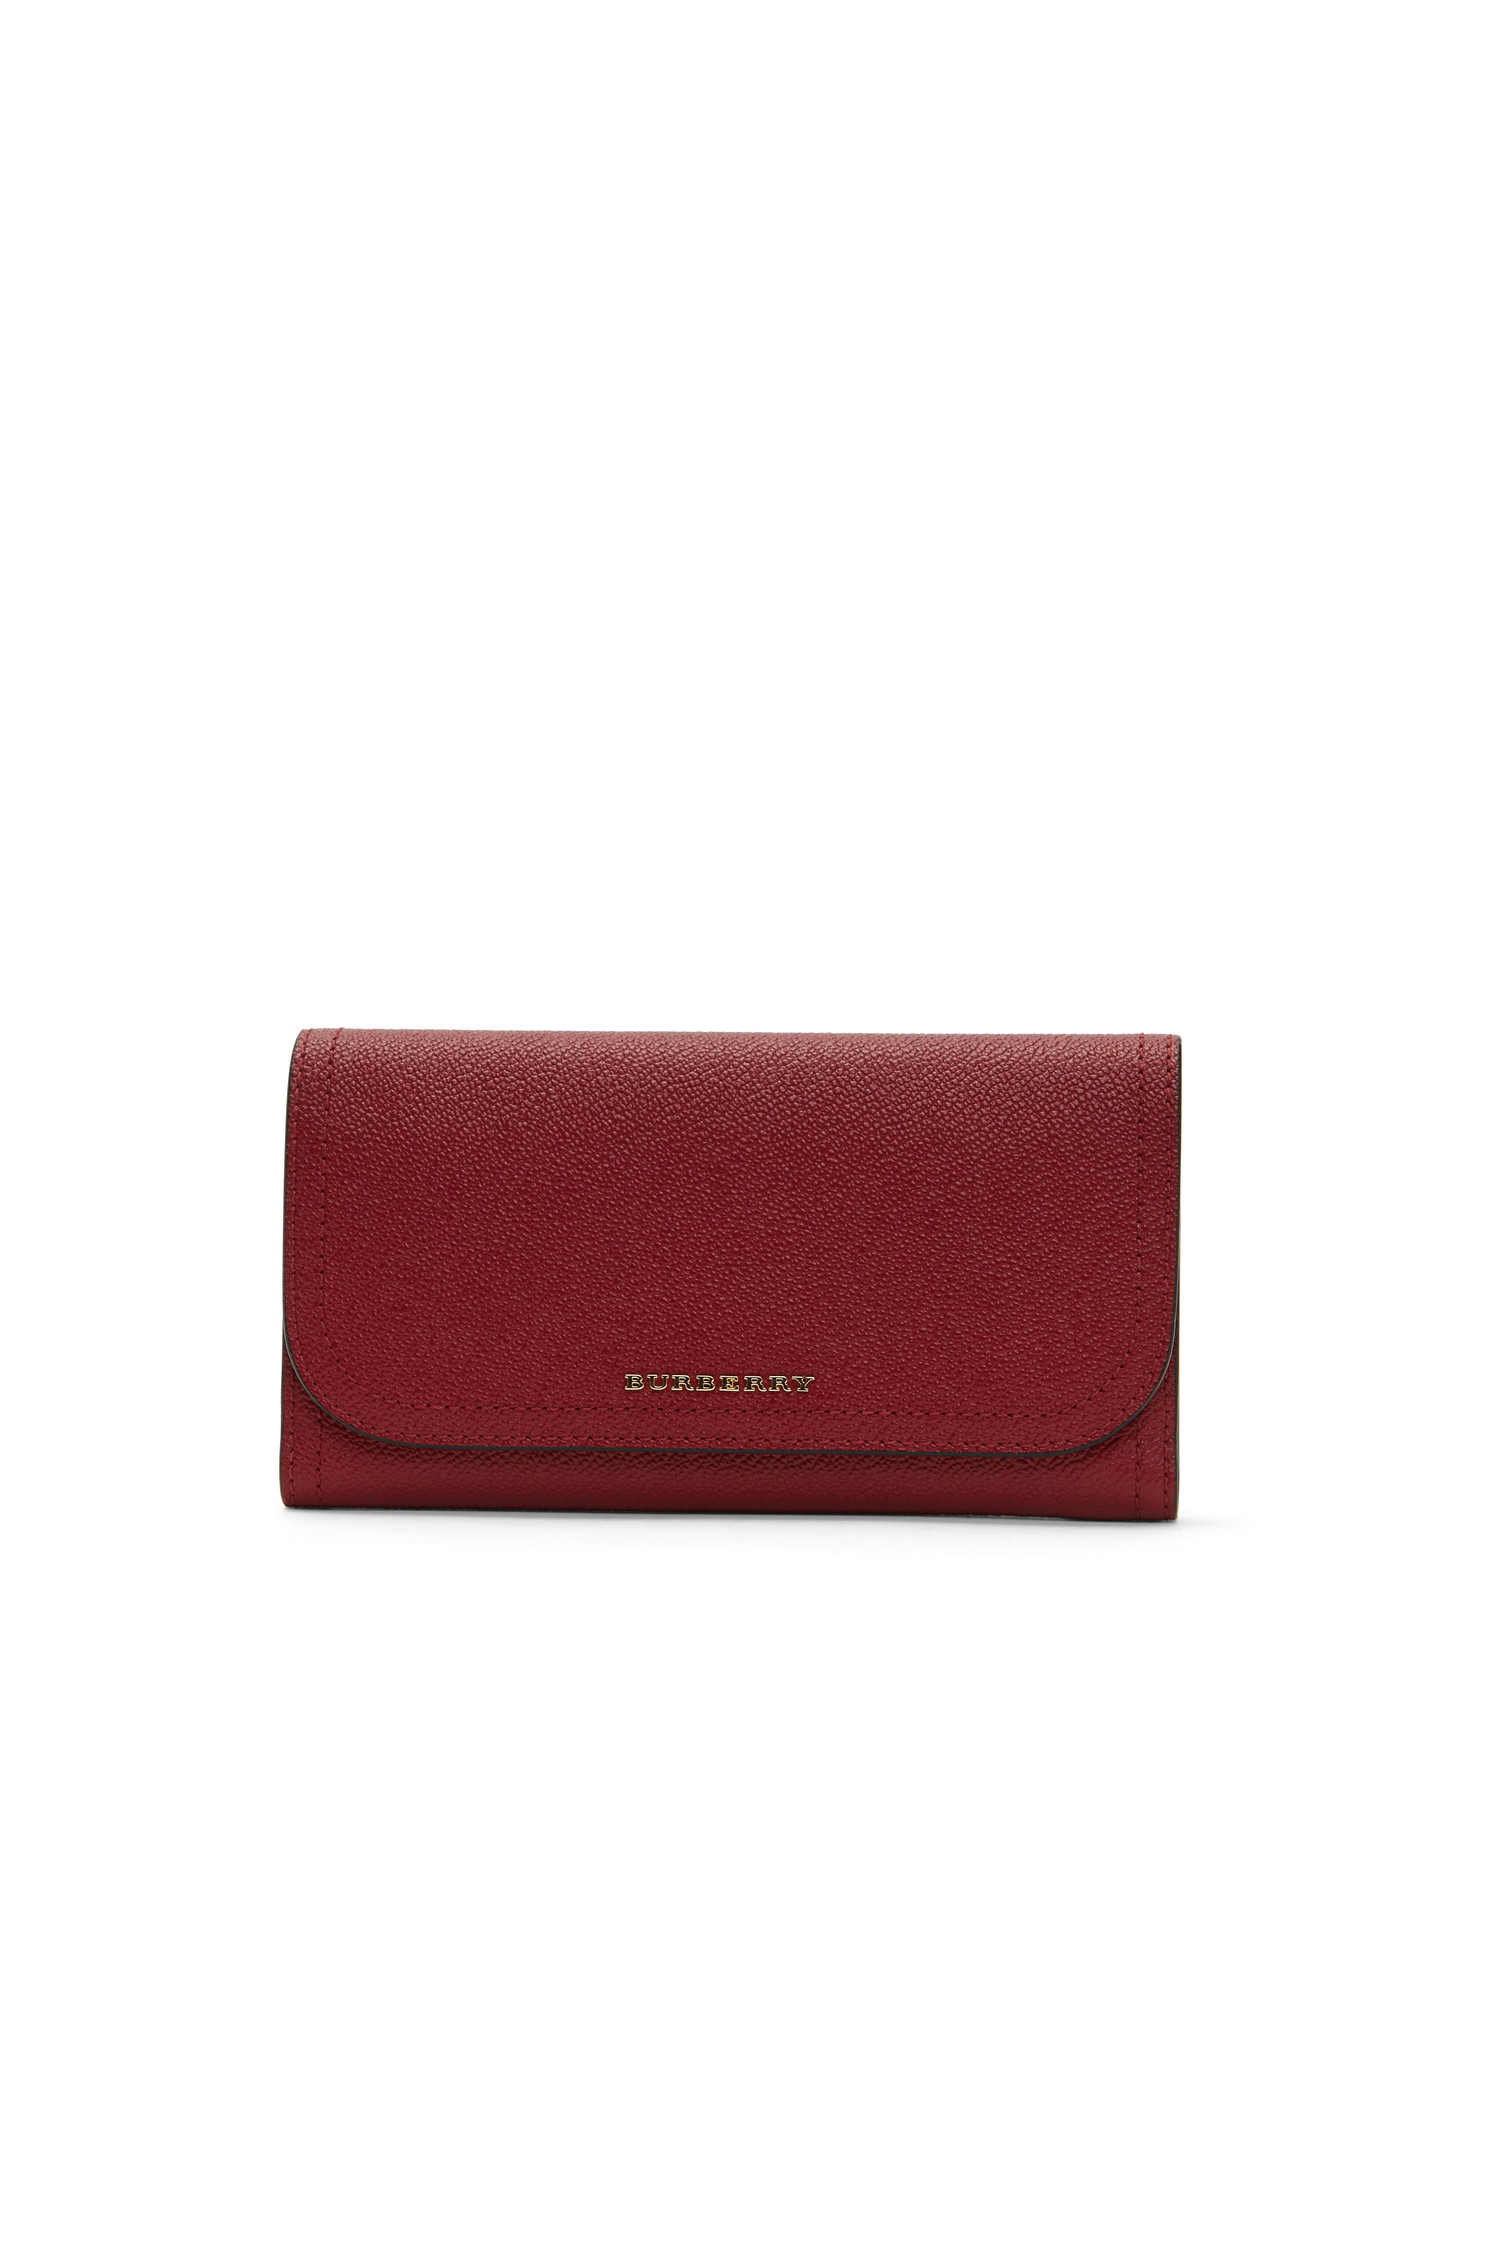 Burberry Red Leather Continental Wallet 